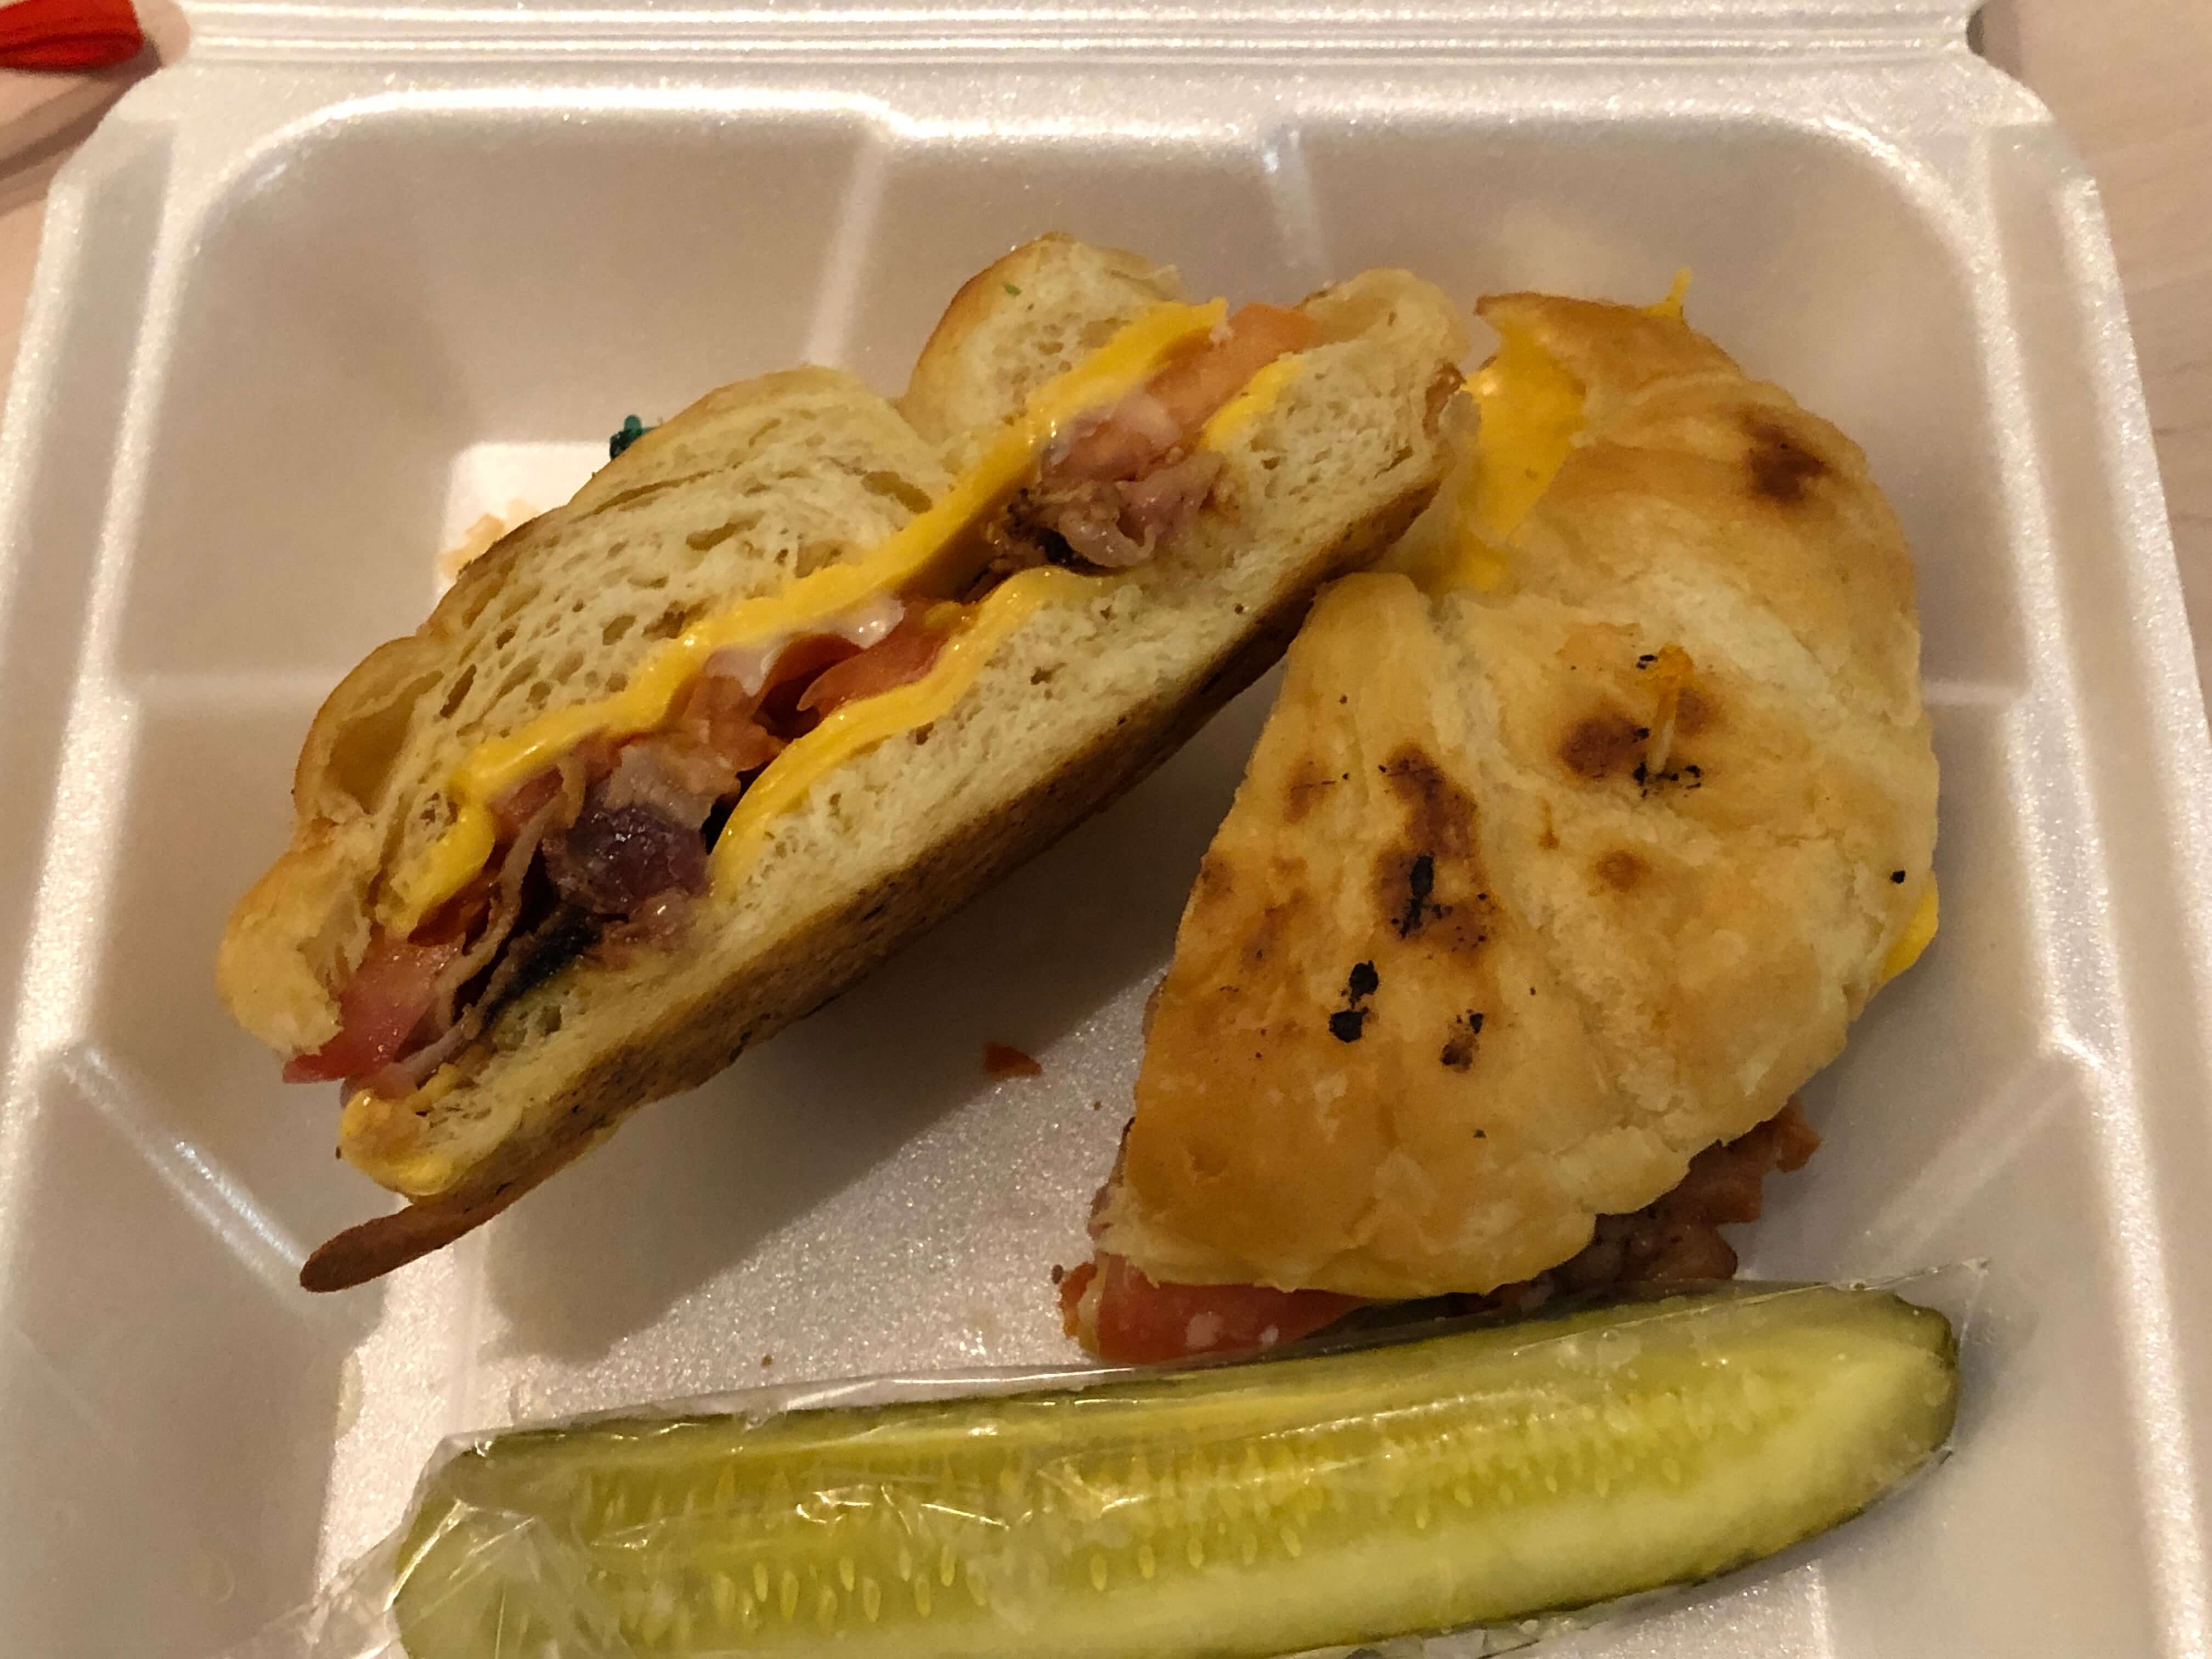 a croissant sandwich with tomato, cheese, and bacon with a pickle in Styrofoam clamshell